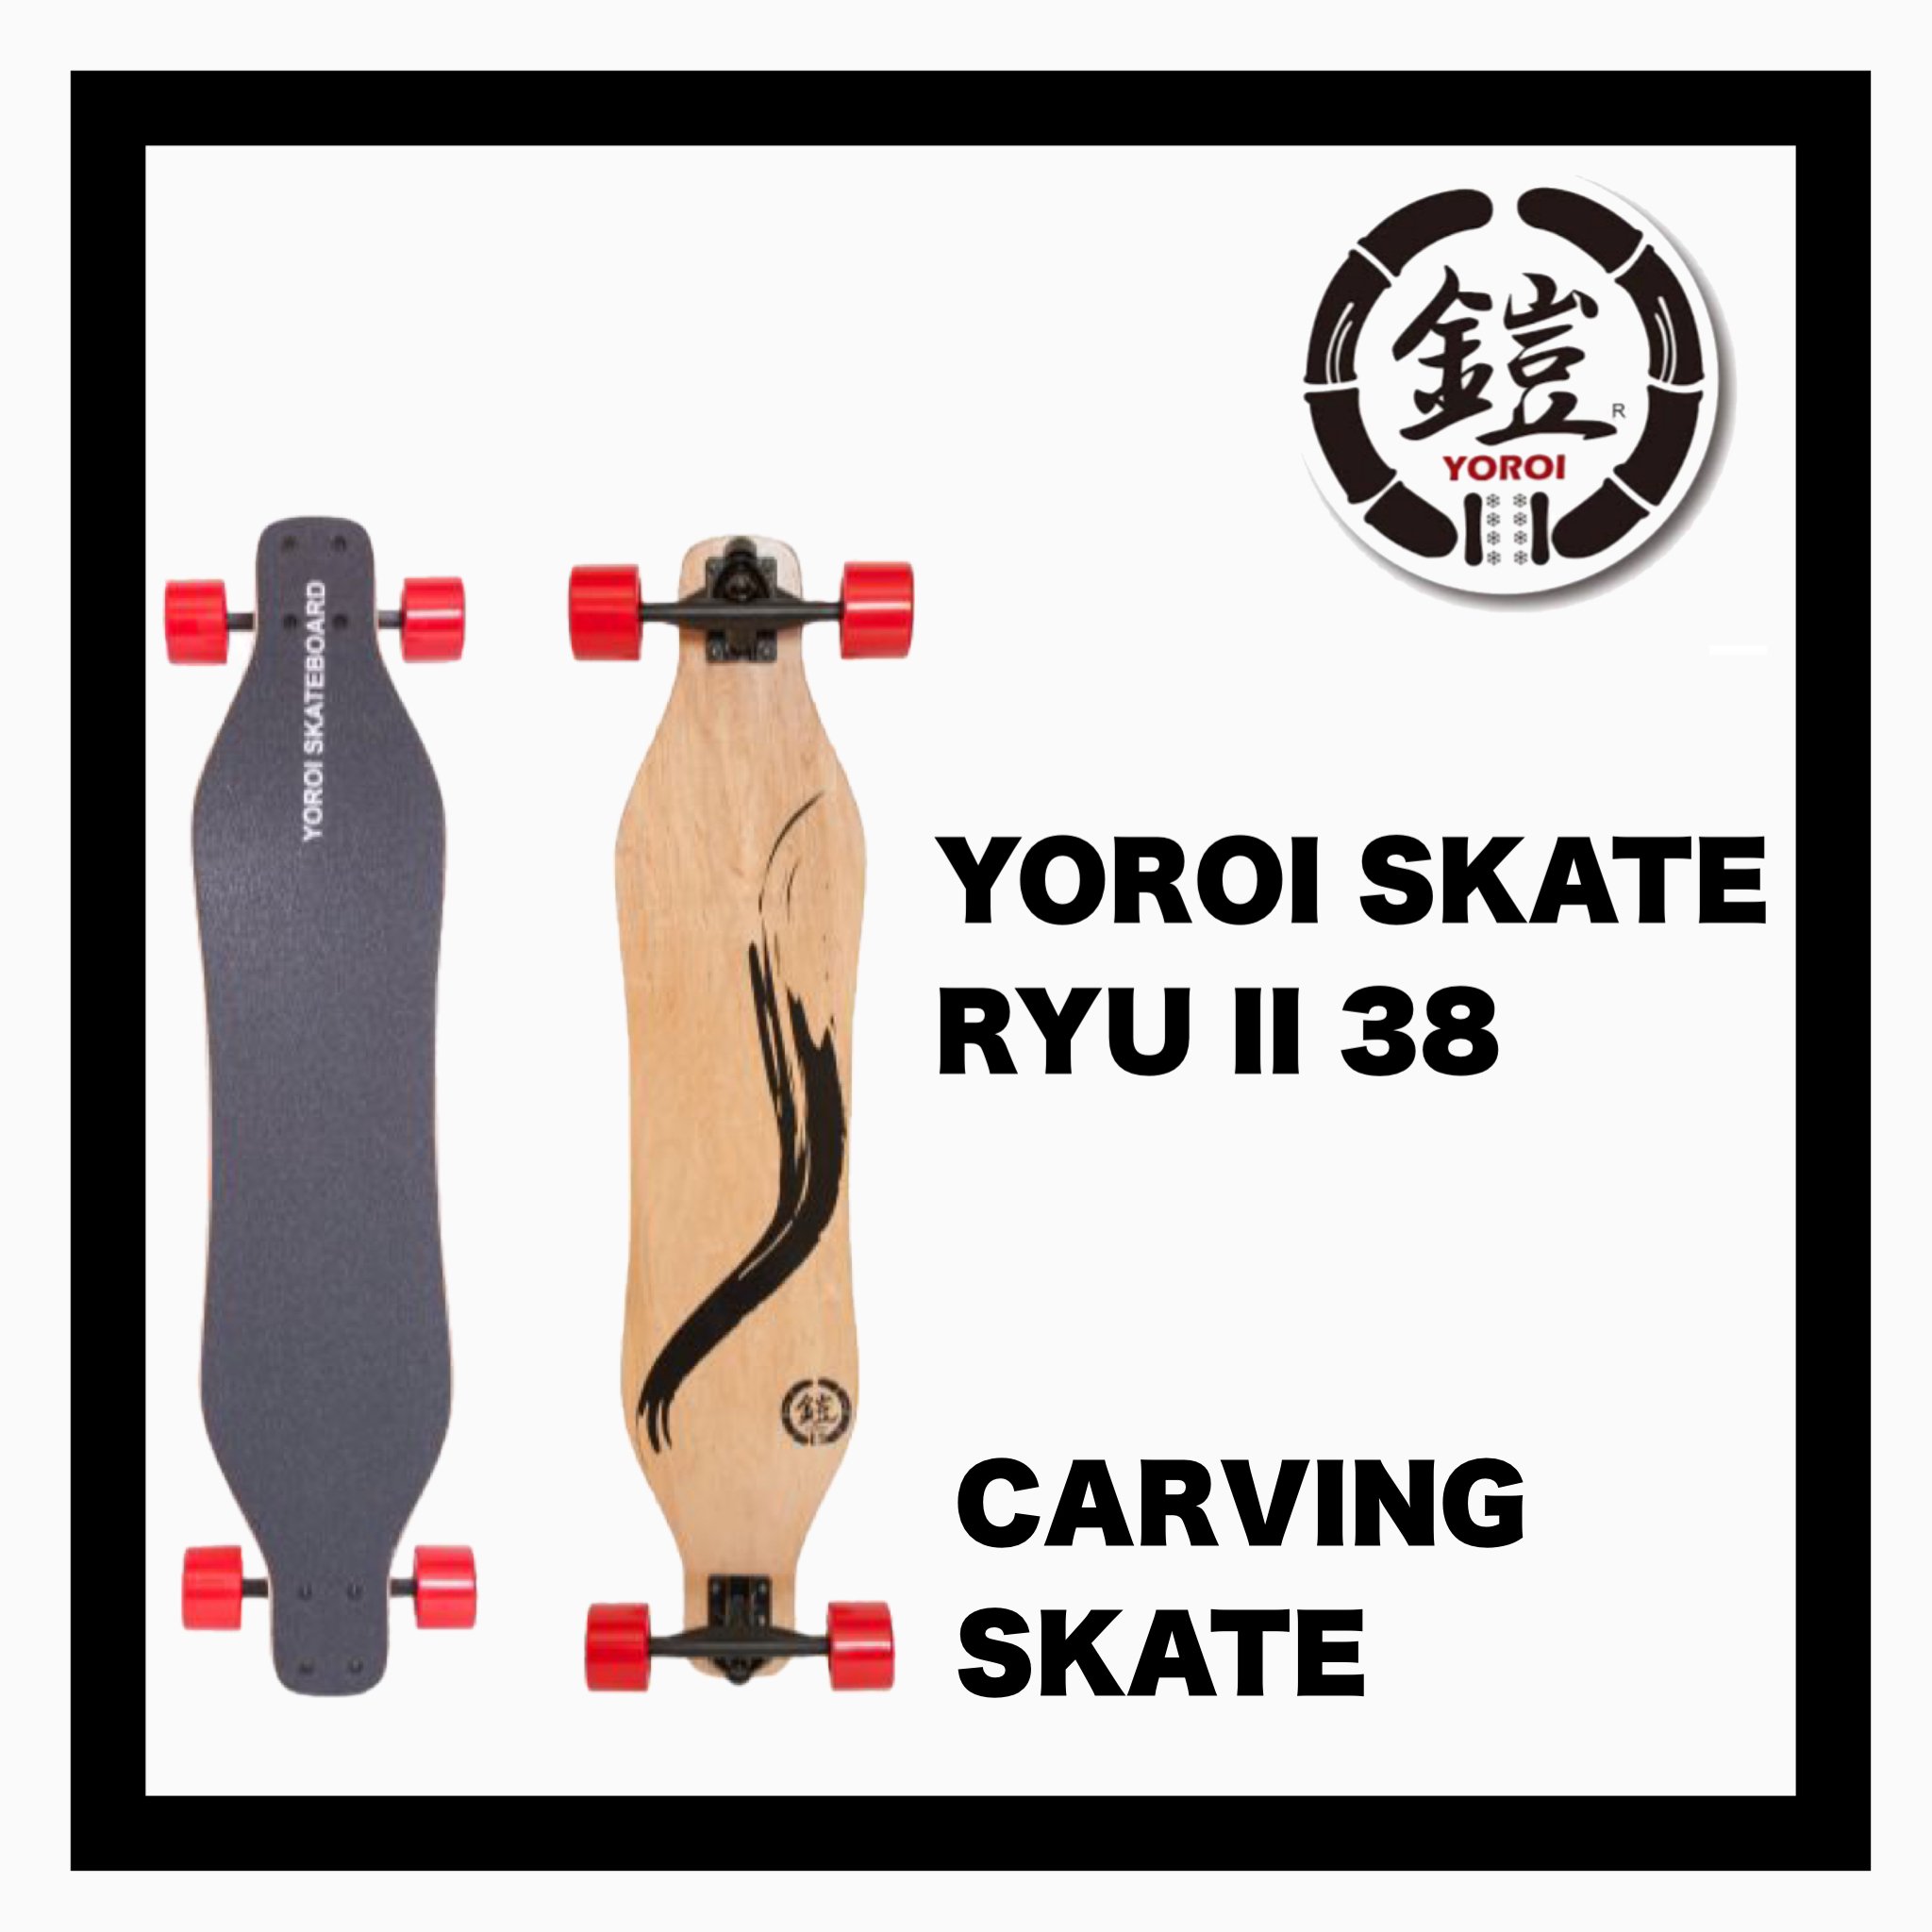 【YOROI SKATE BOARD】 RYU 38 ロングスケートボード - JOINT HOUSE